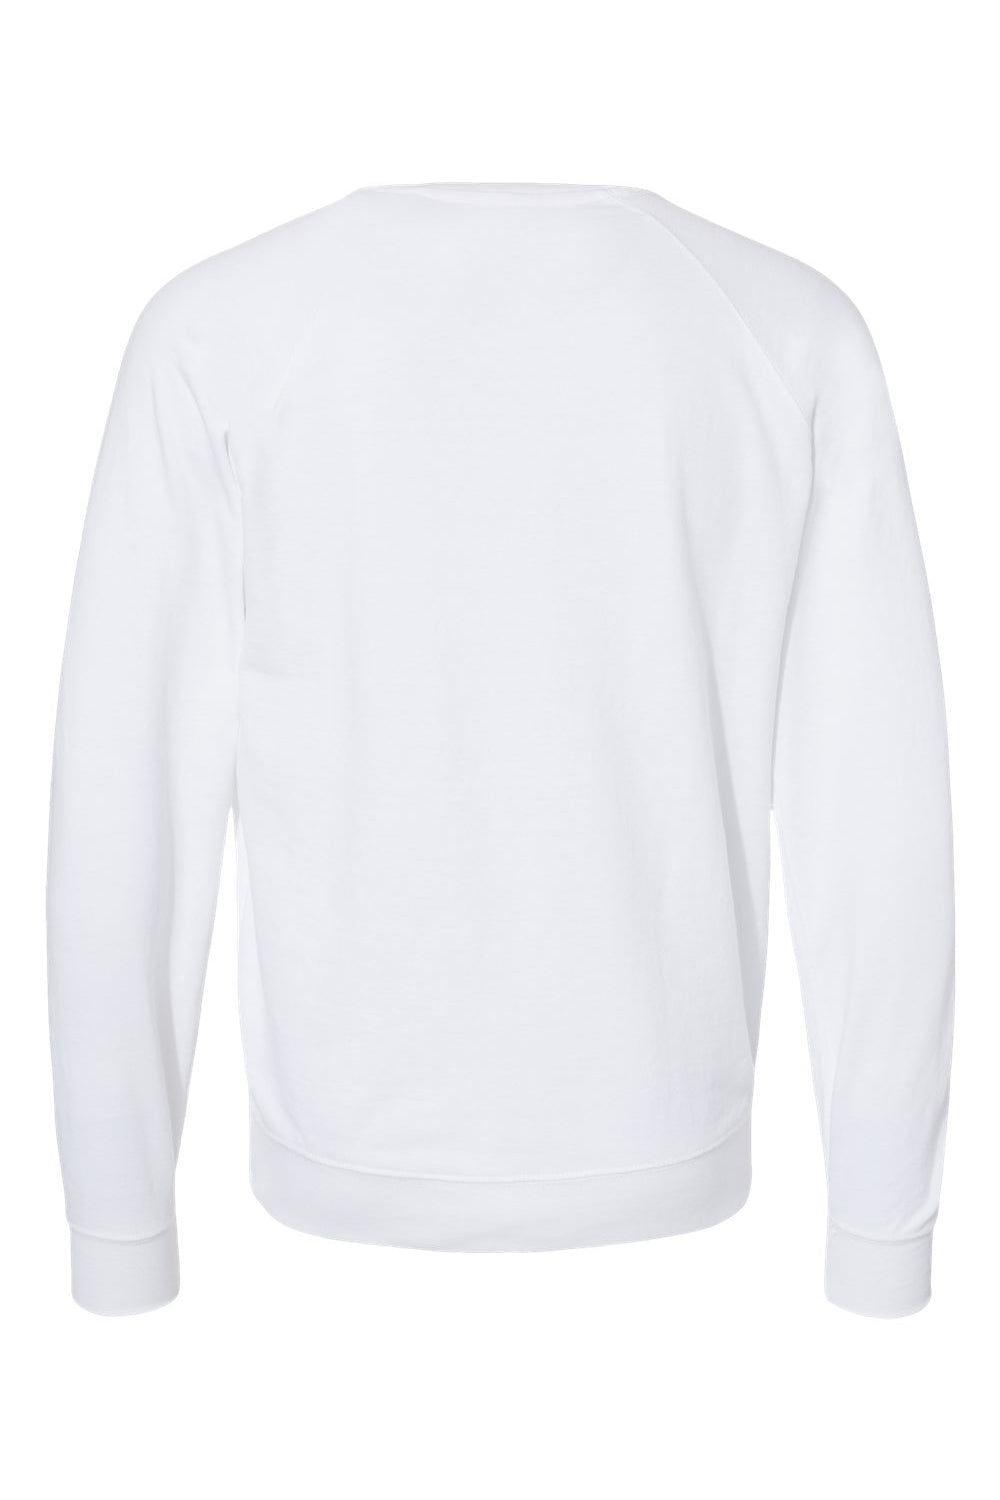 Independent Trading Co. SS1000C Mens Icon Loopback Terry Crewneck Sweatshirt White Flat Back